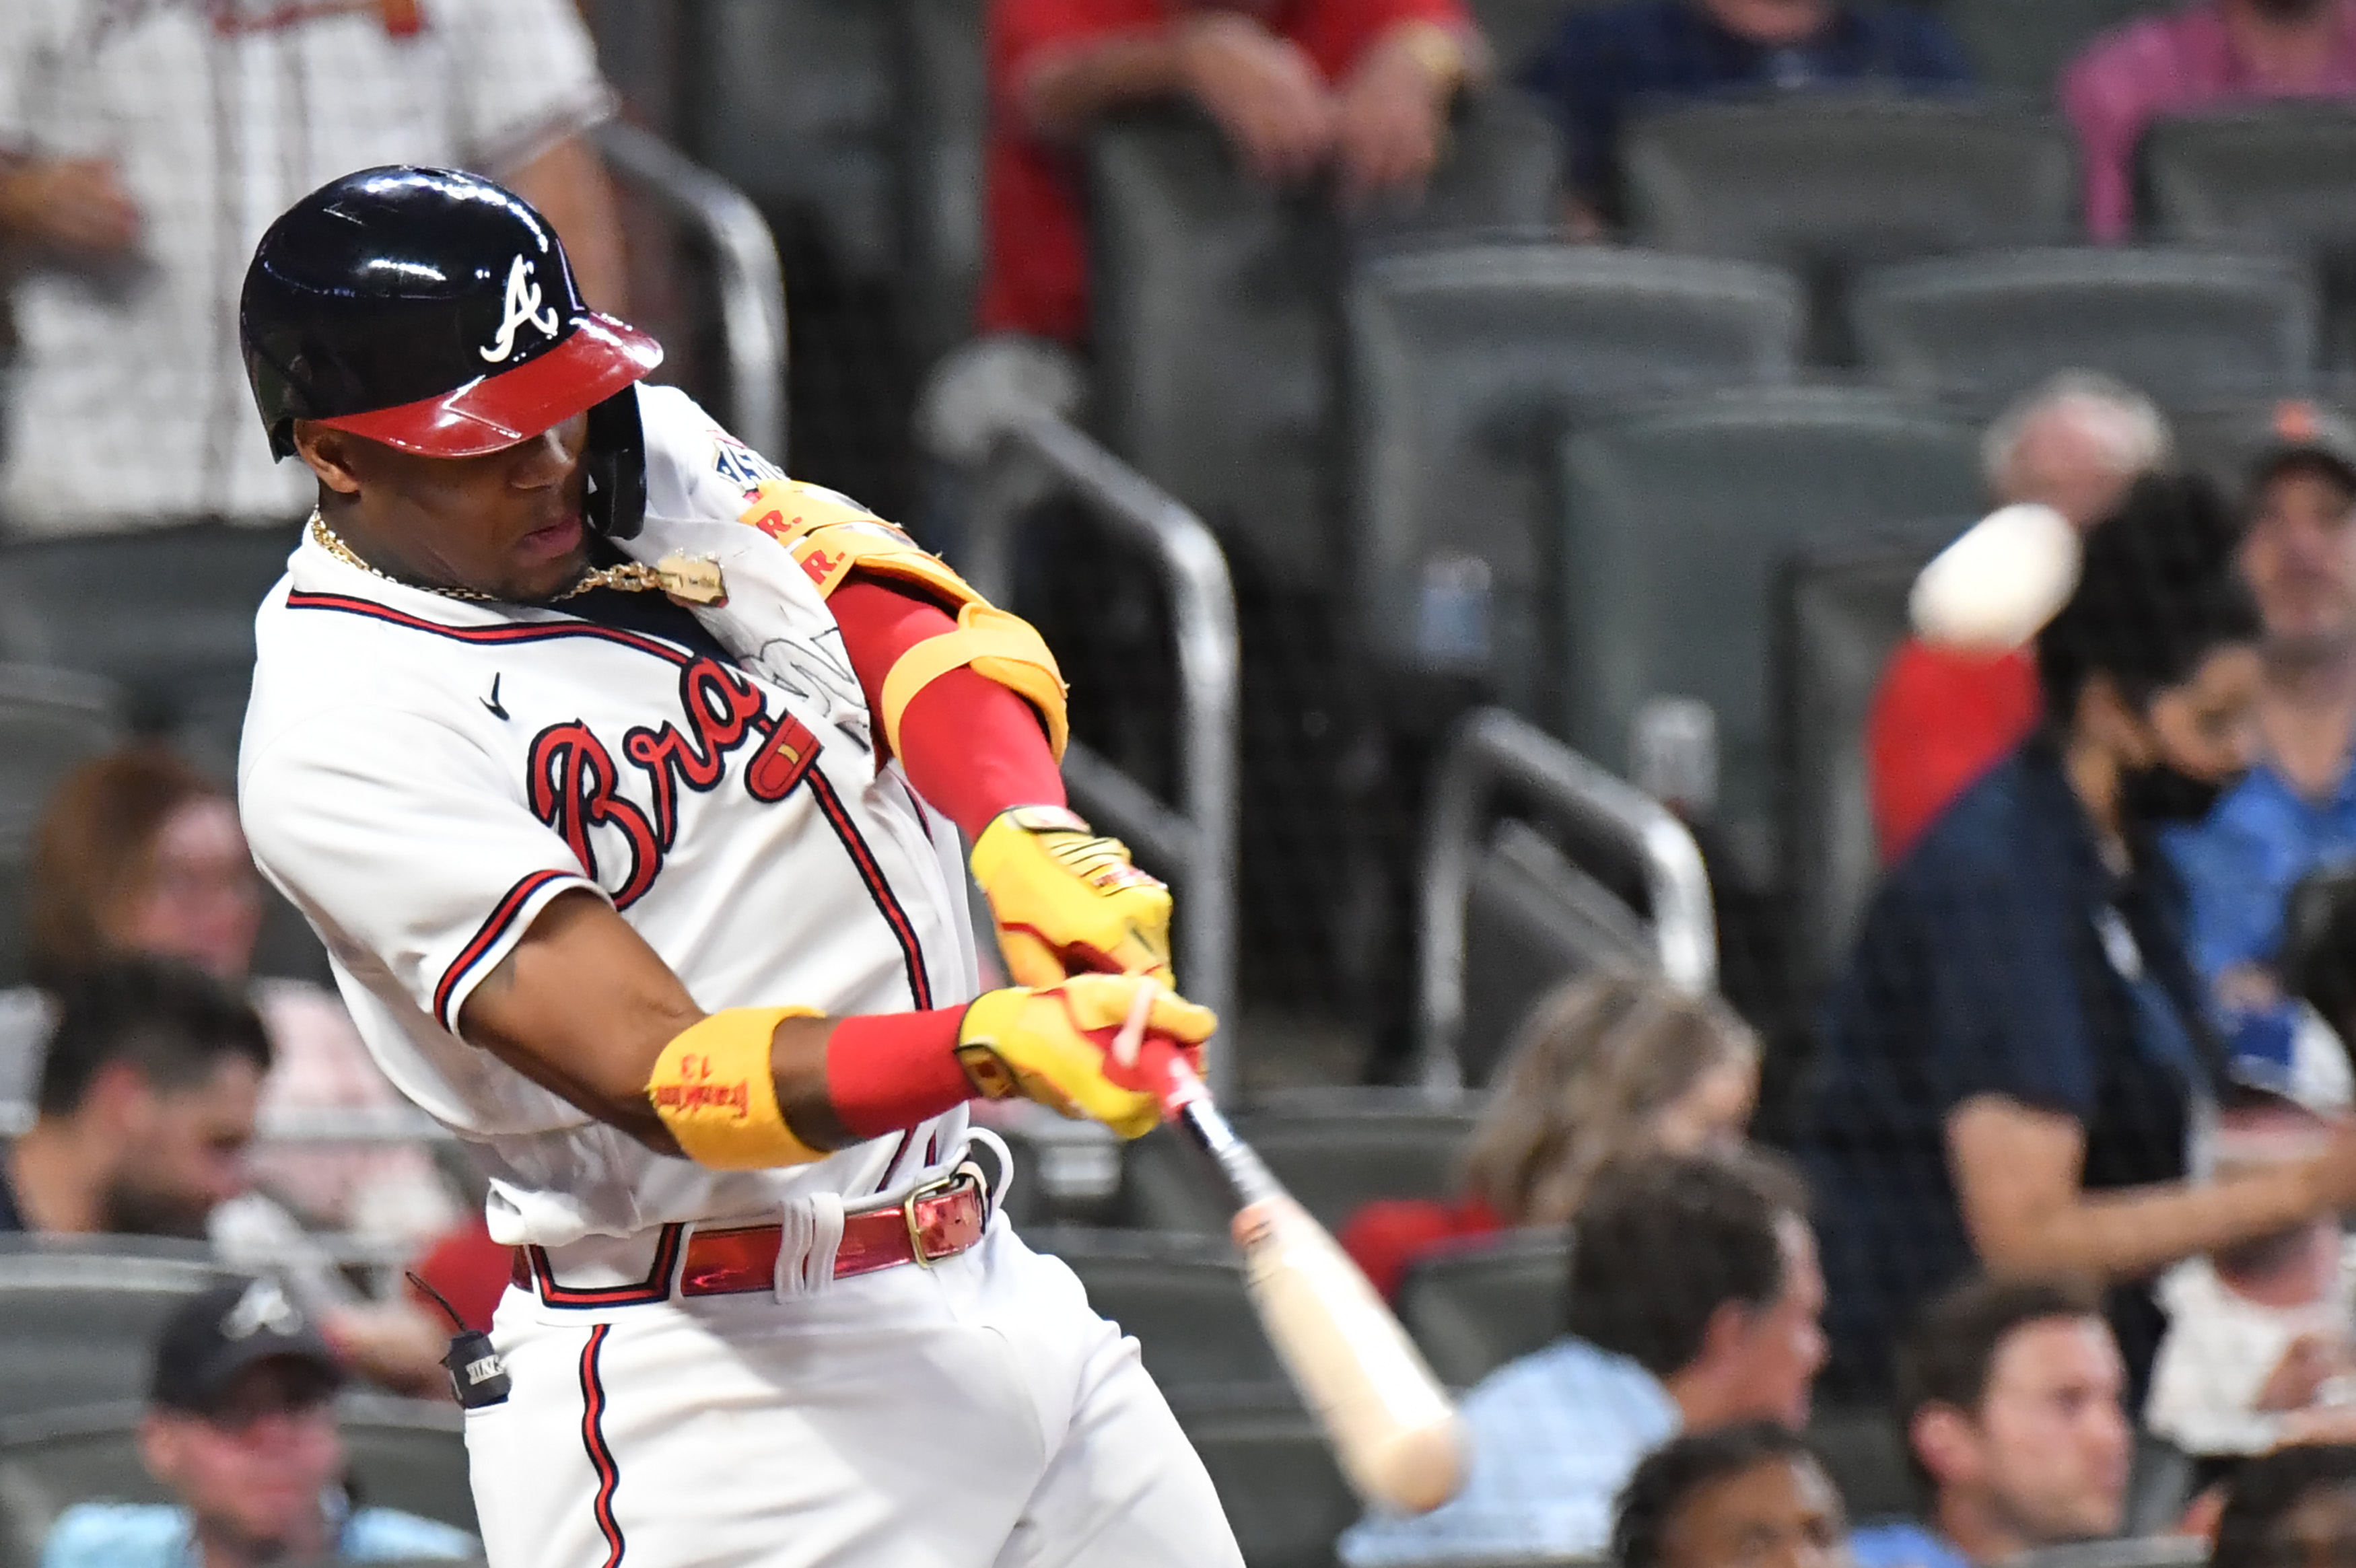 Ronald Acuna Jr. hits walk-off home run to give Braves win over Mets